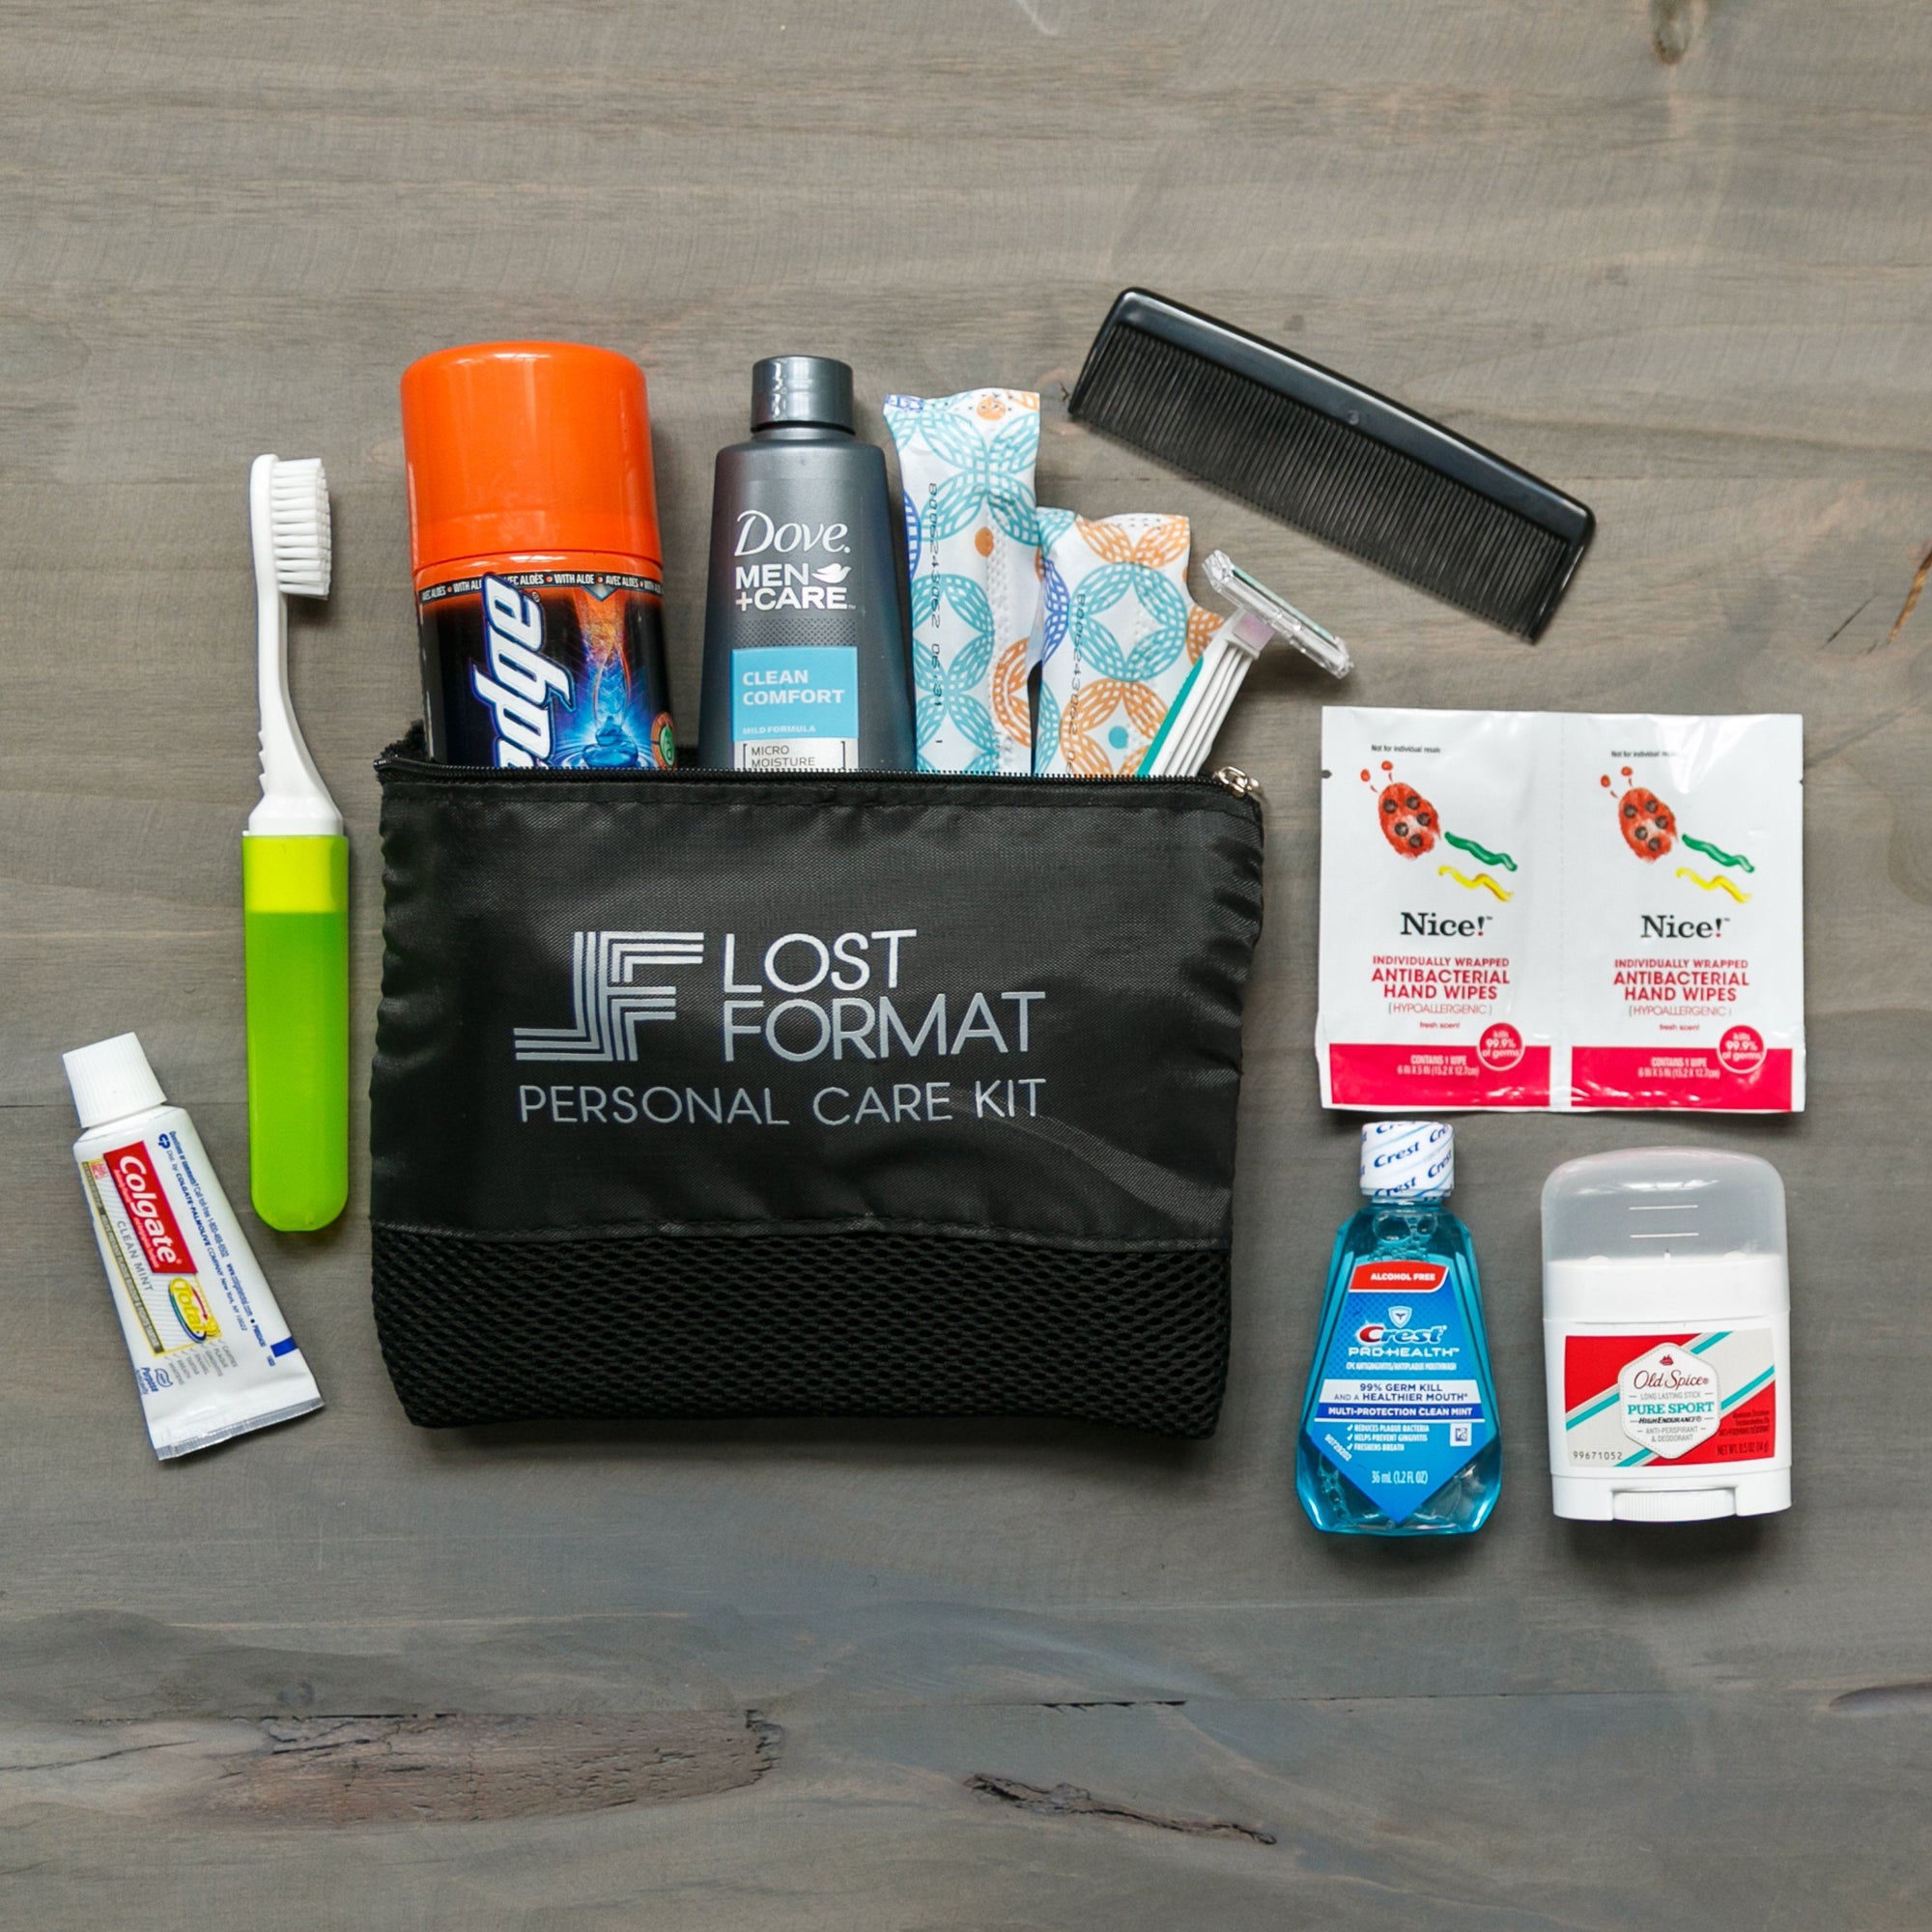 Giveaway - Donate A Personal Care Kit